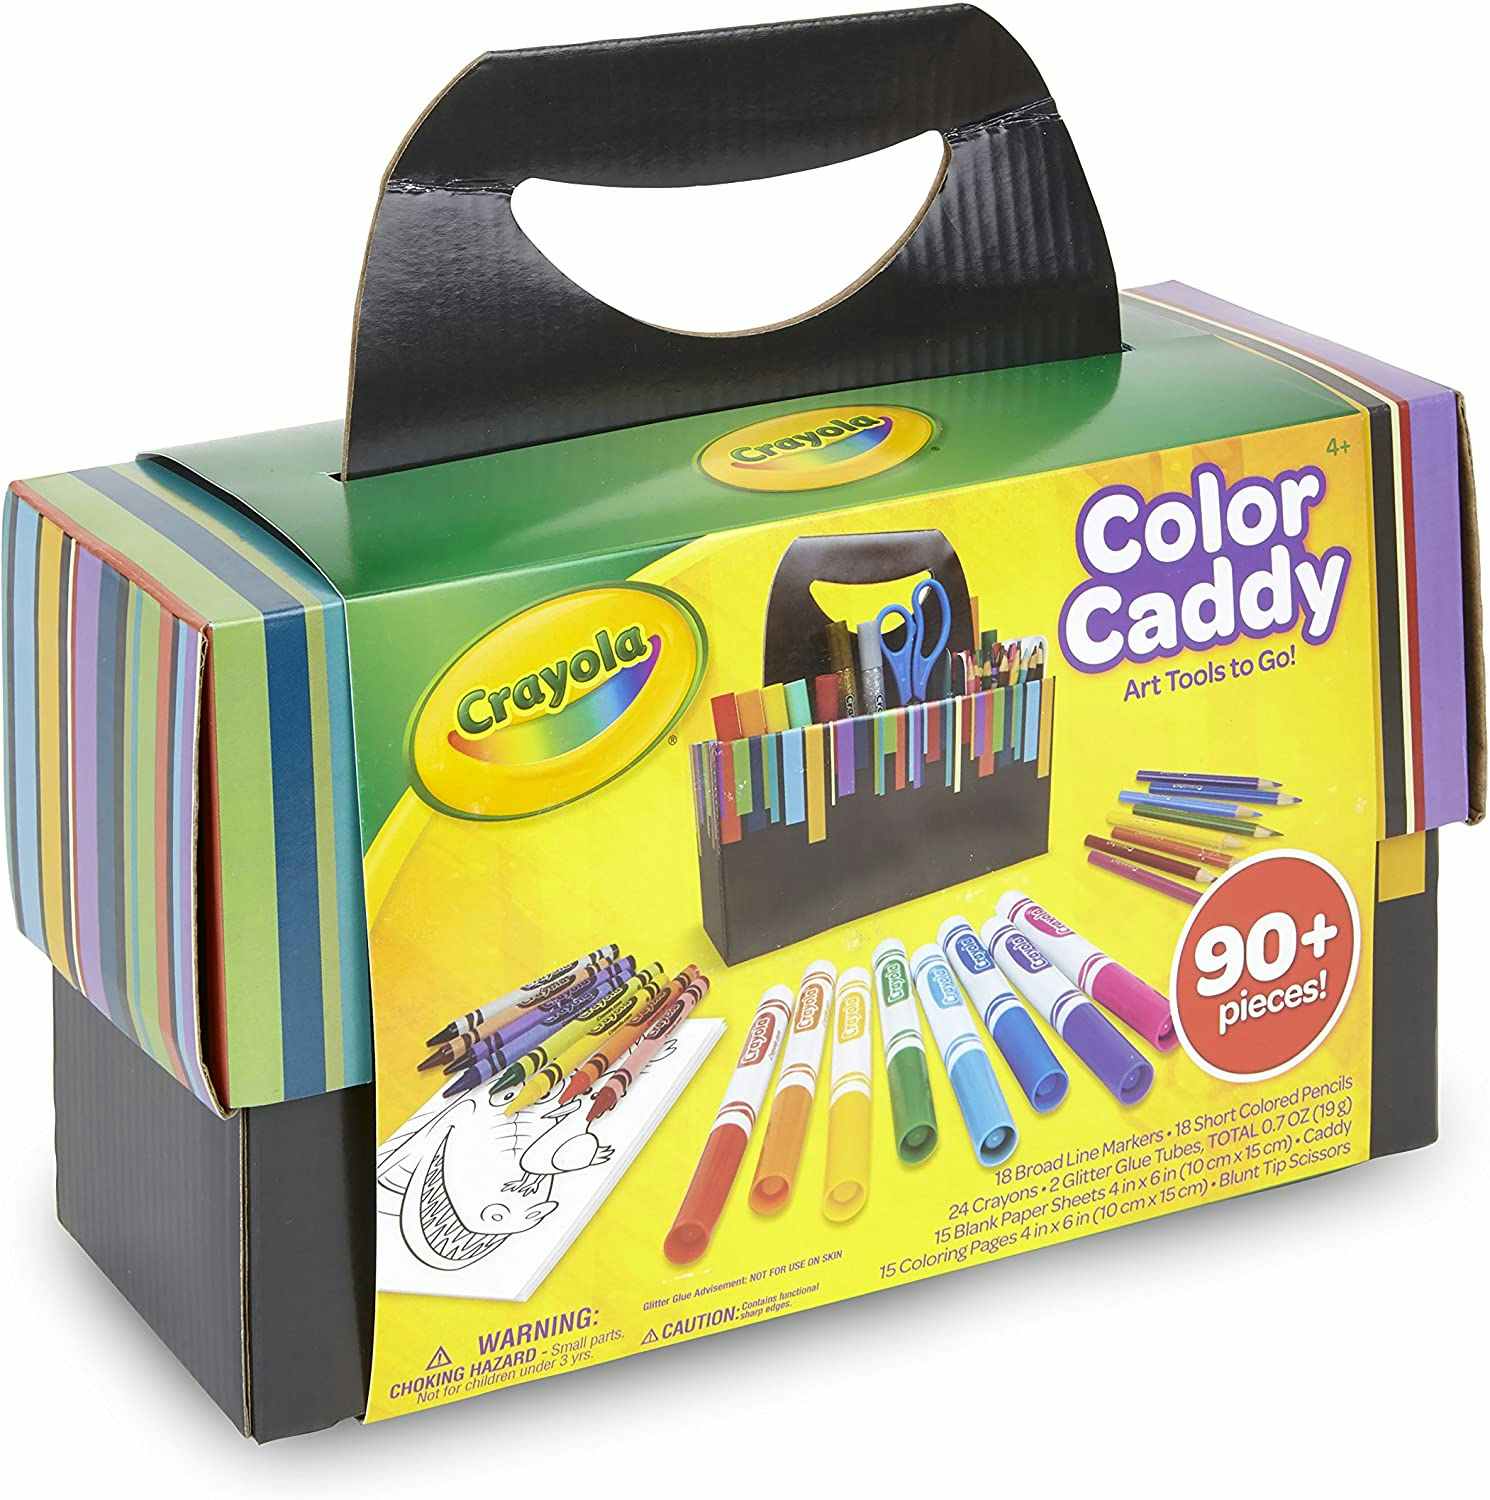 gifts for 2 year olds - A Crayola Color Caddy on a white background.